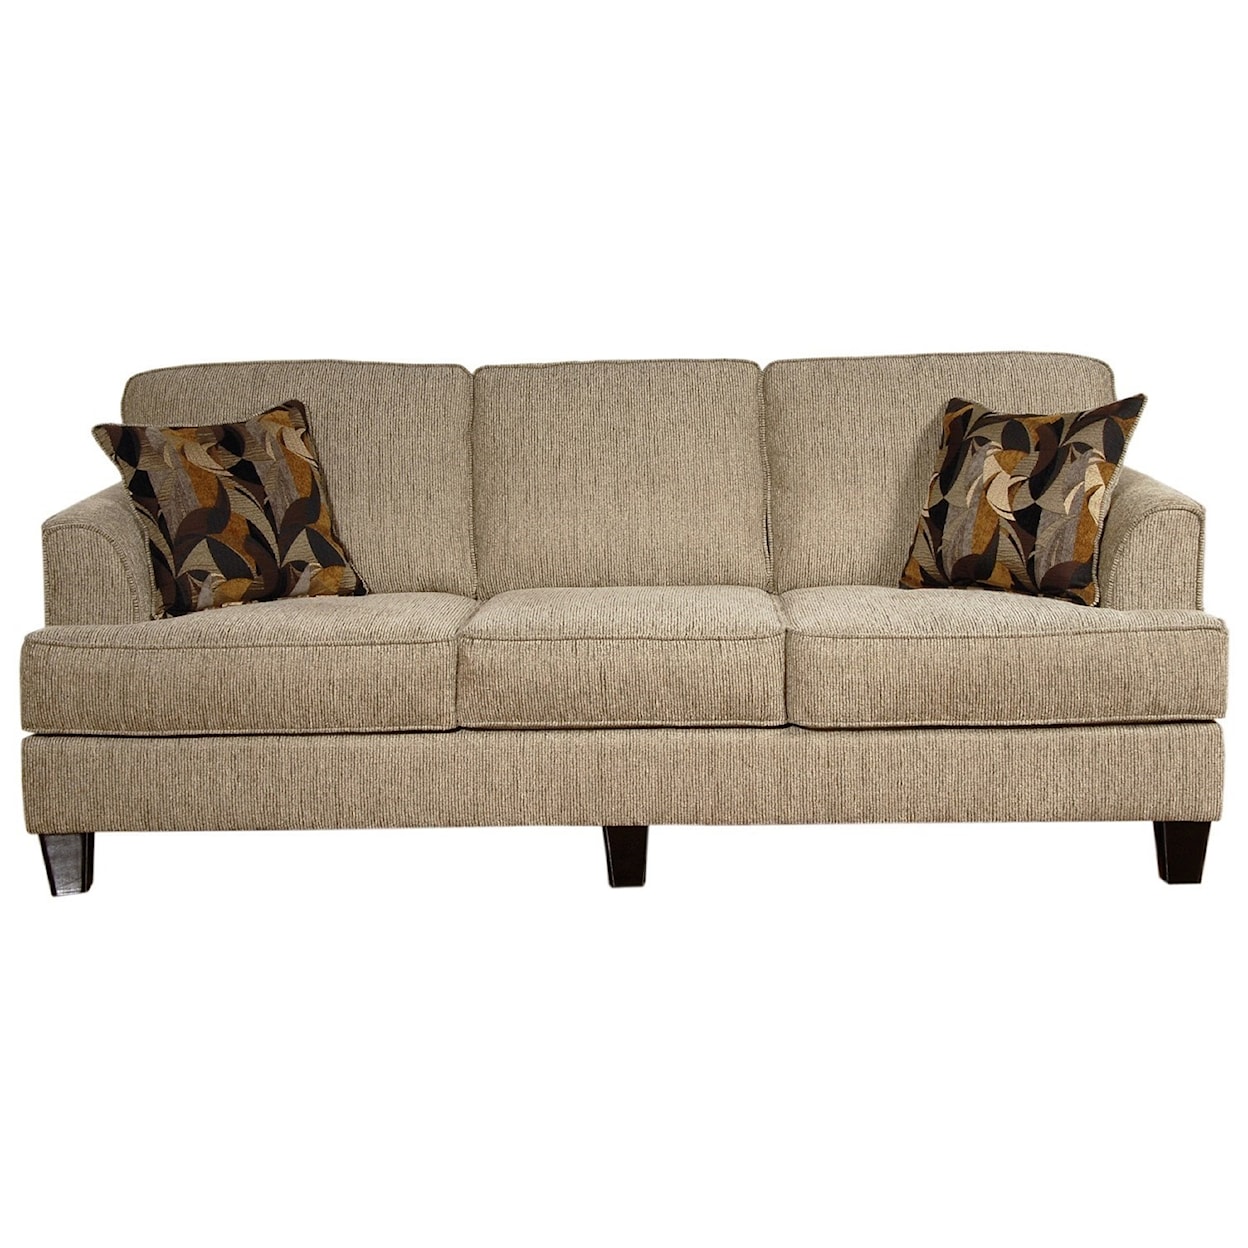 Serta Upholstery by Hughes Furniture 5600 Contemporary Sofa